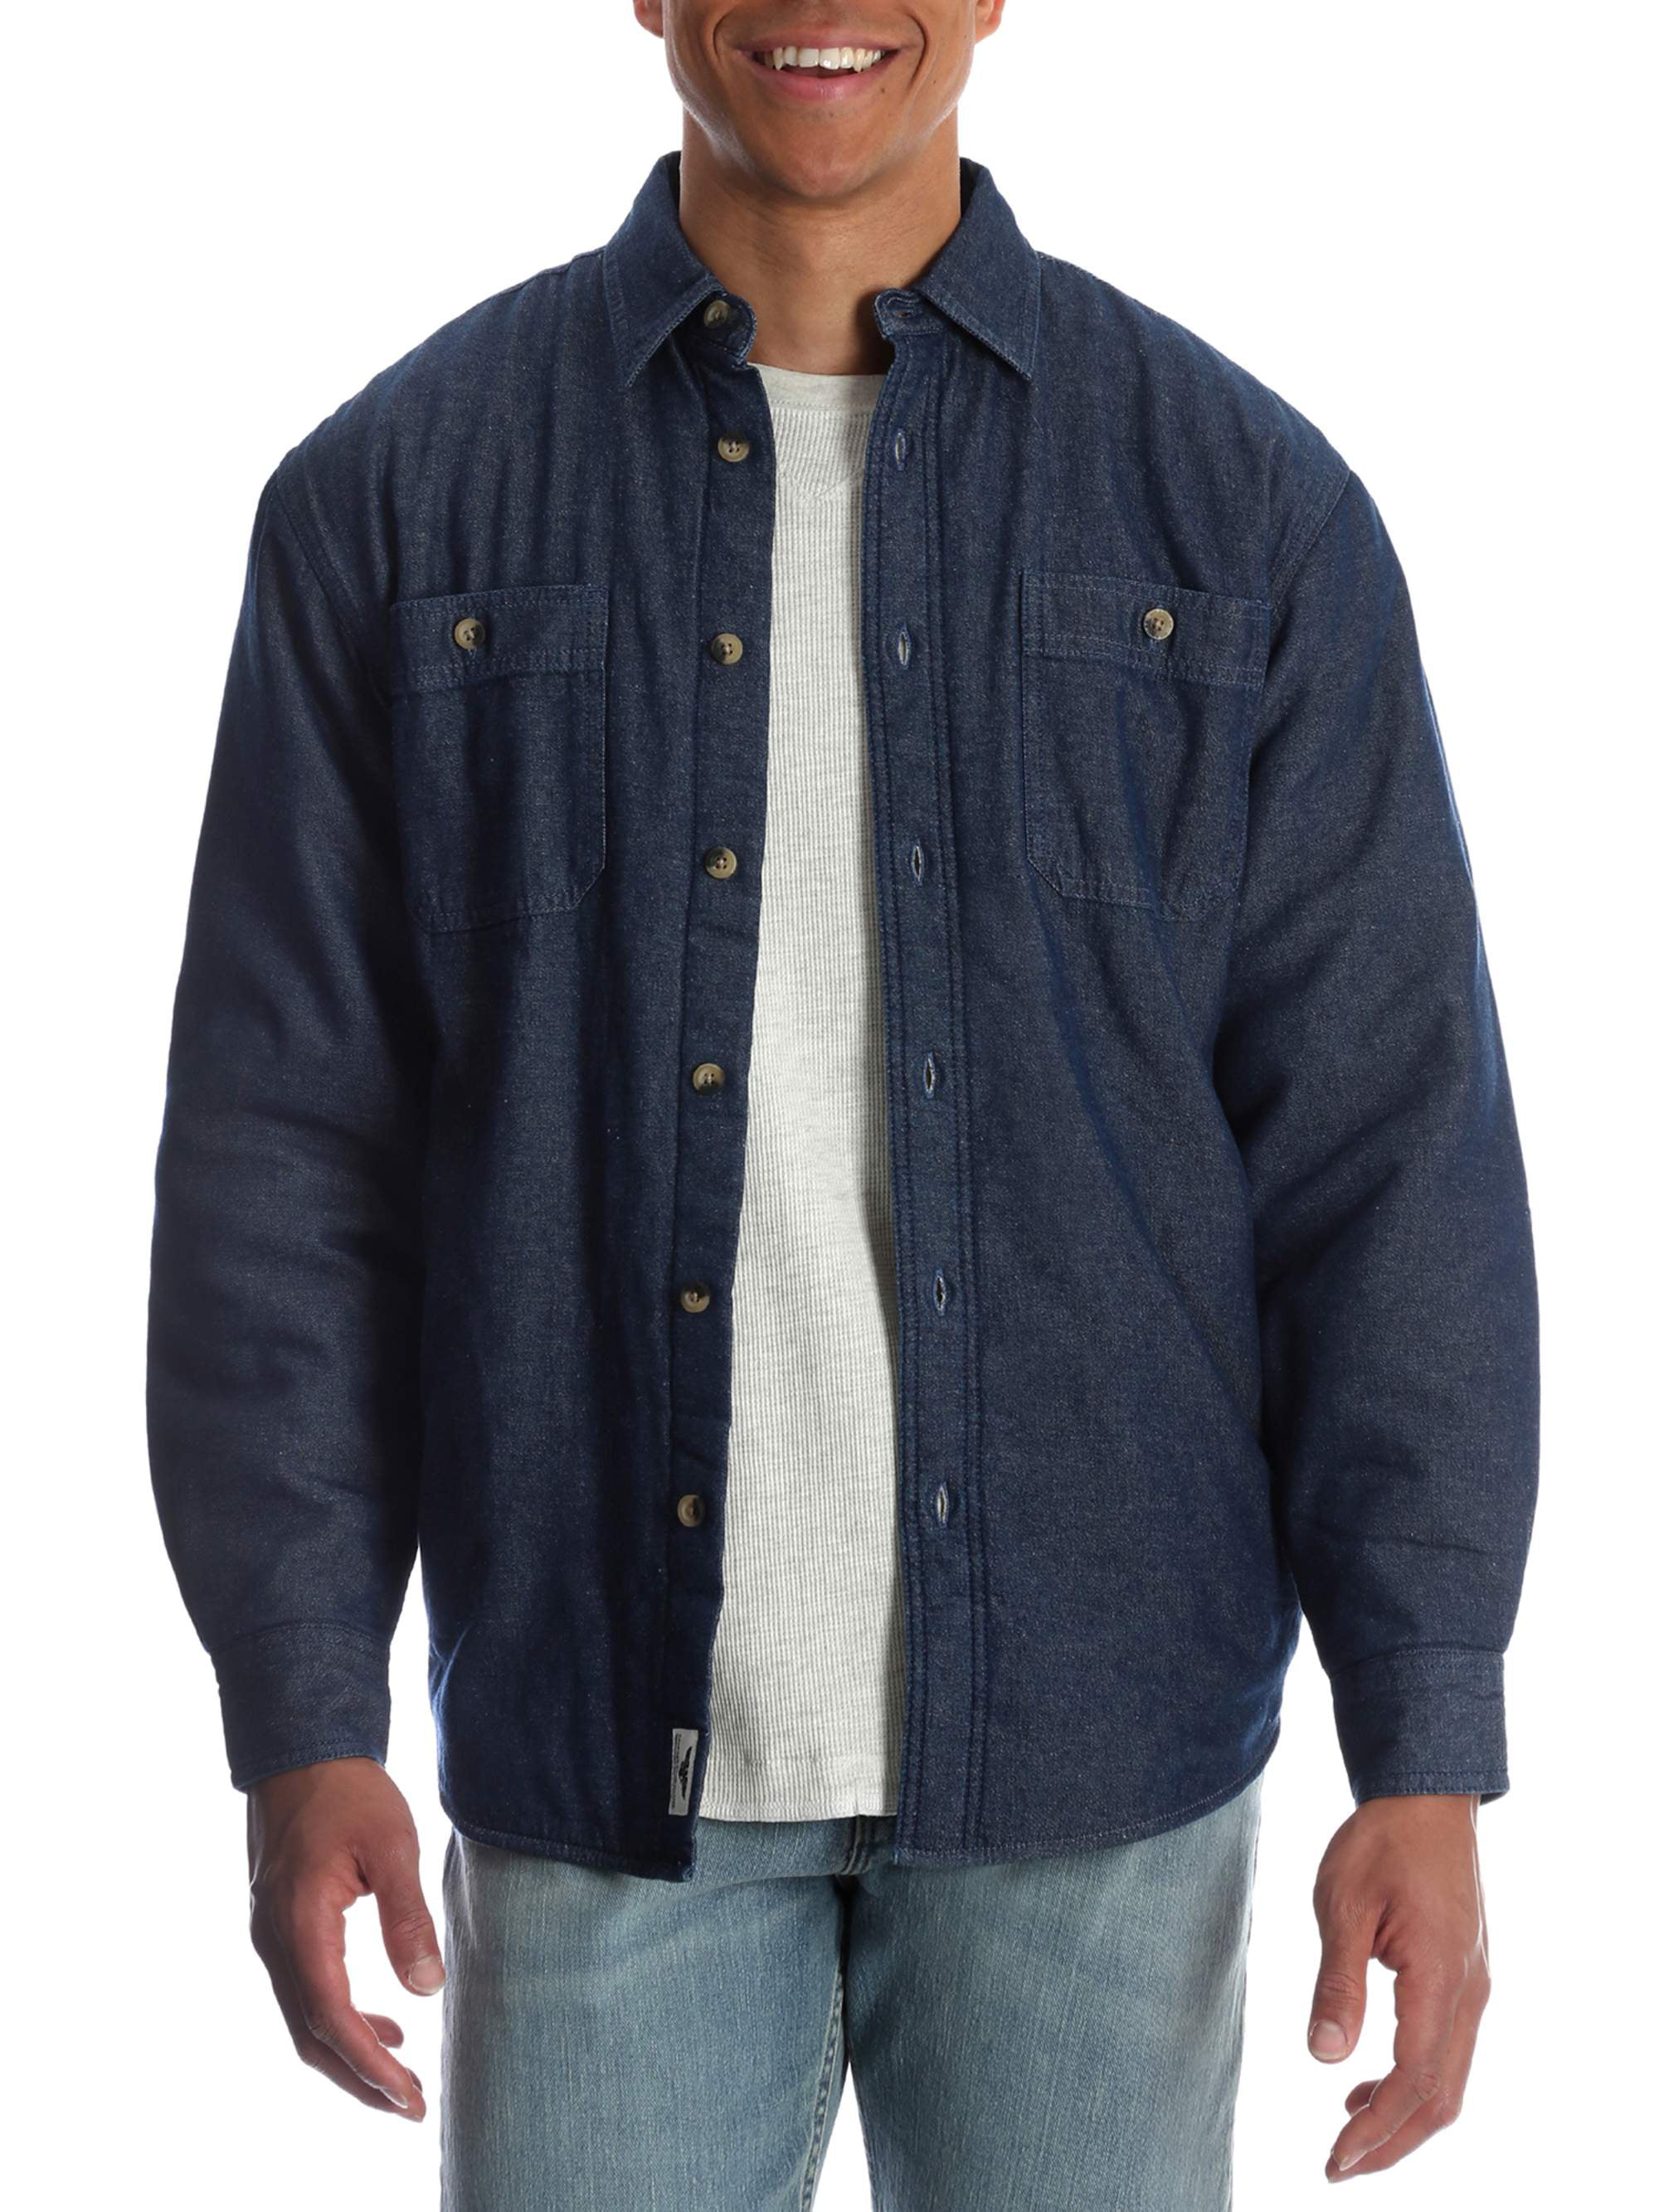 Wrangler Men's and Big Men's Sherpa Lined Flannel Shirt, Sizes Up to ...